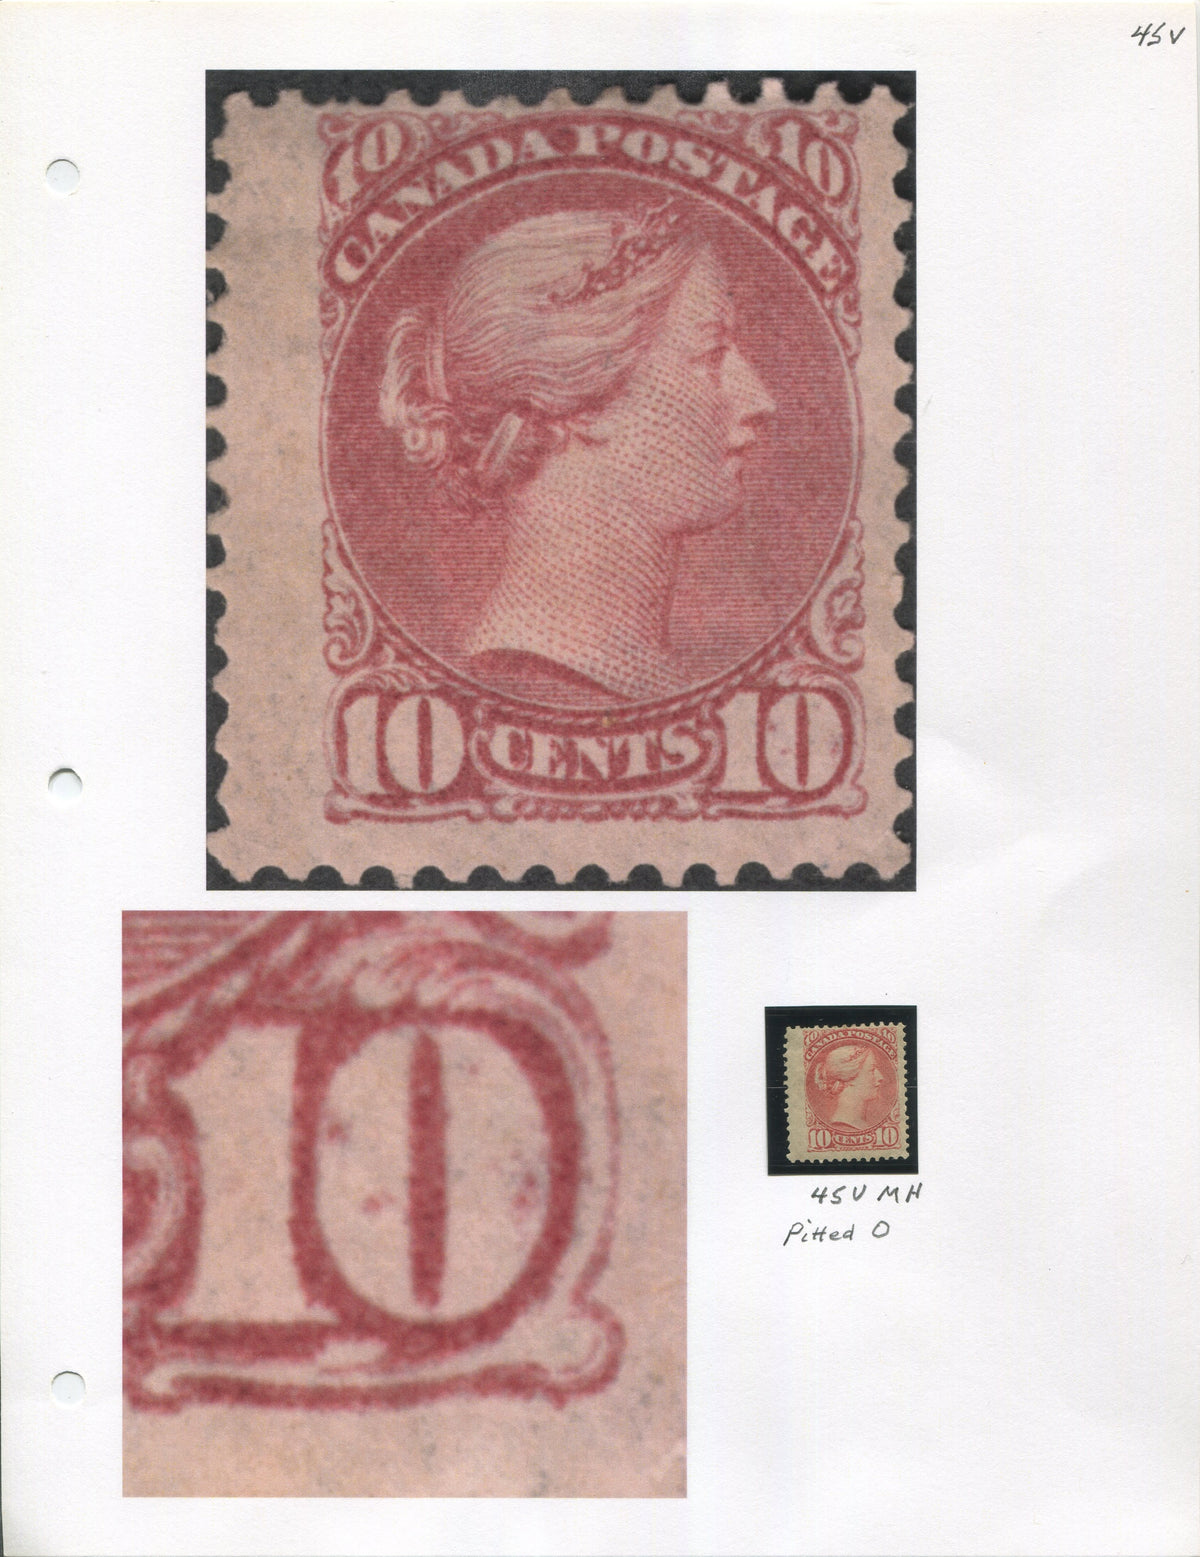 0045CA2206 - Canada #45v - Mint, Pitted &#39;0&#39; Variety